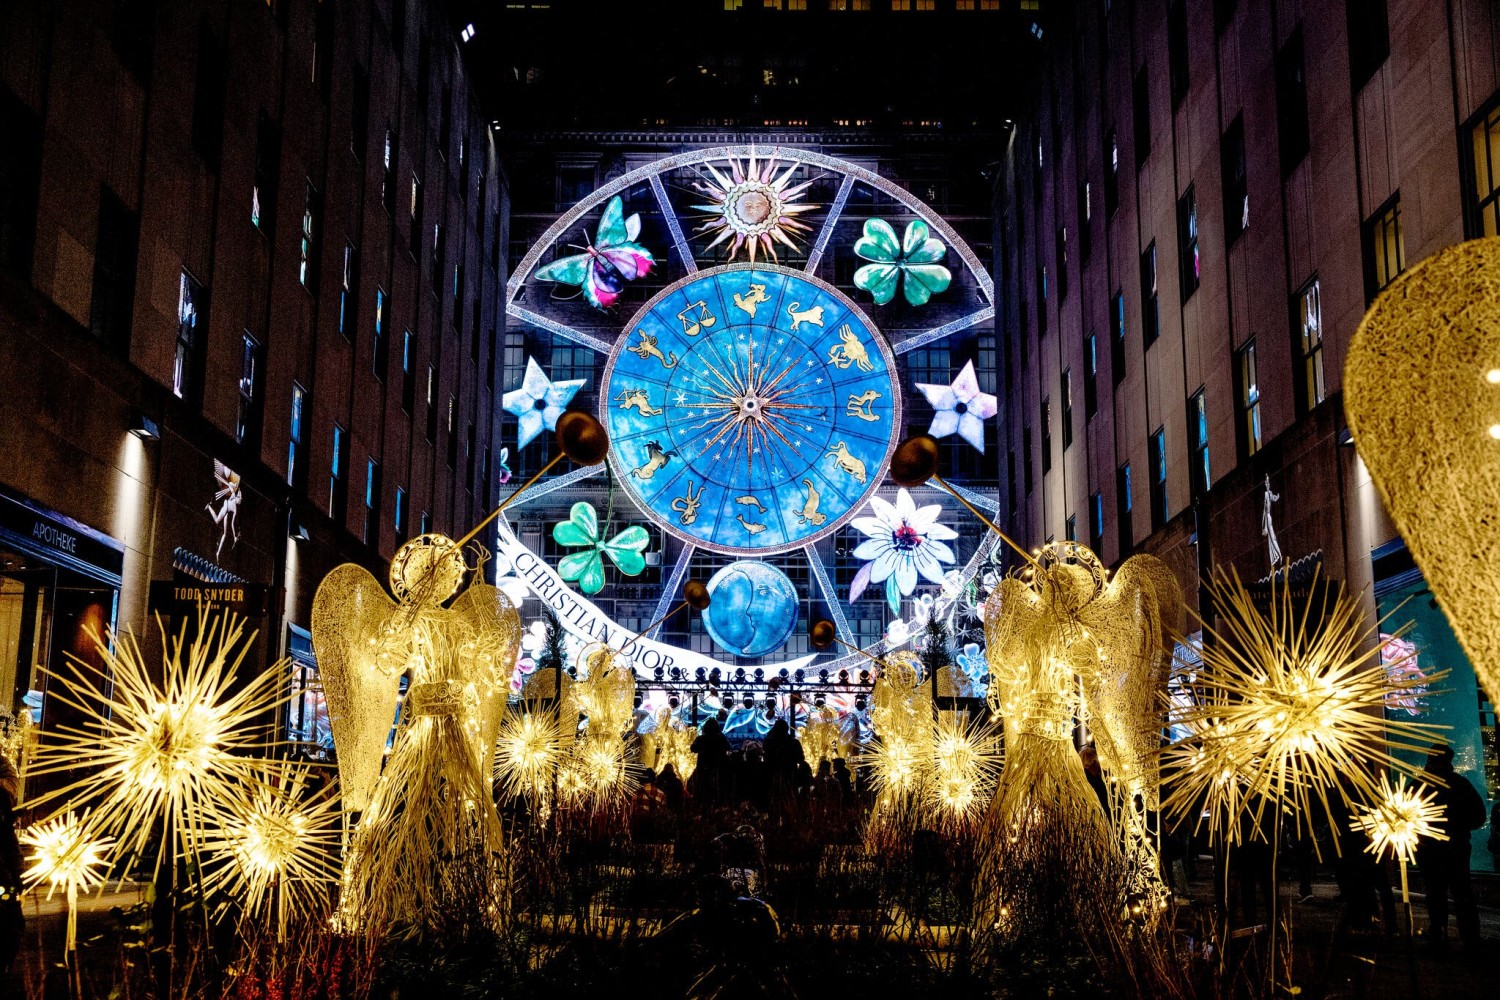 The light display on the facade at Saks Fifth Avenue on Monday night.Credit...